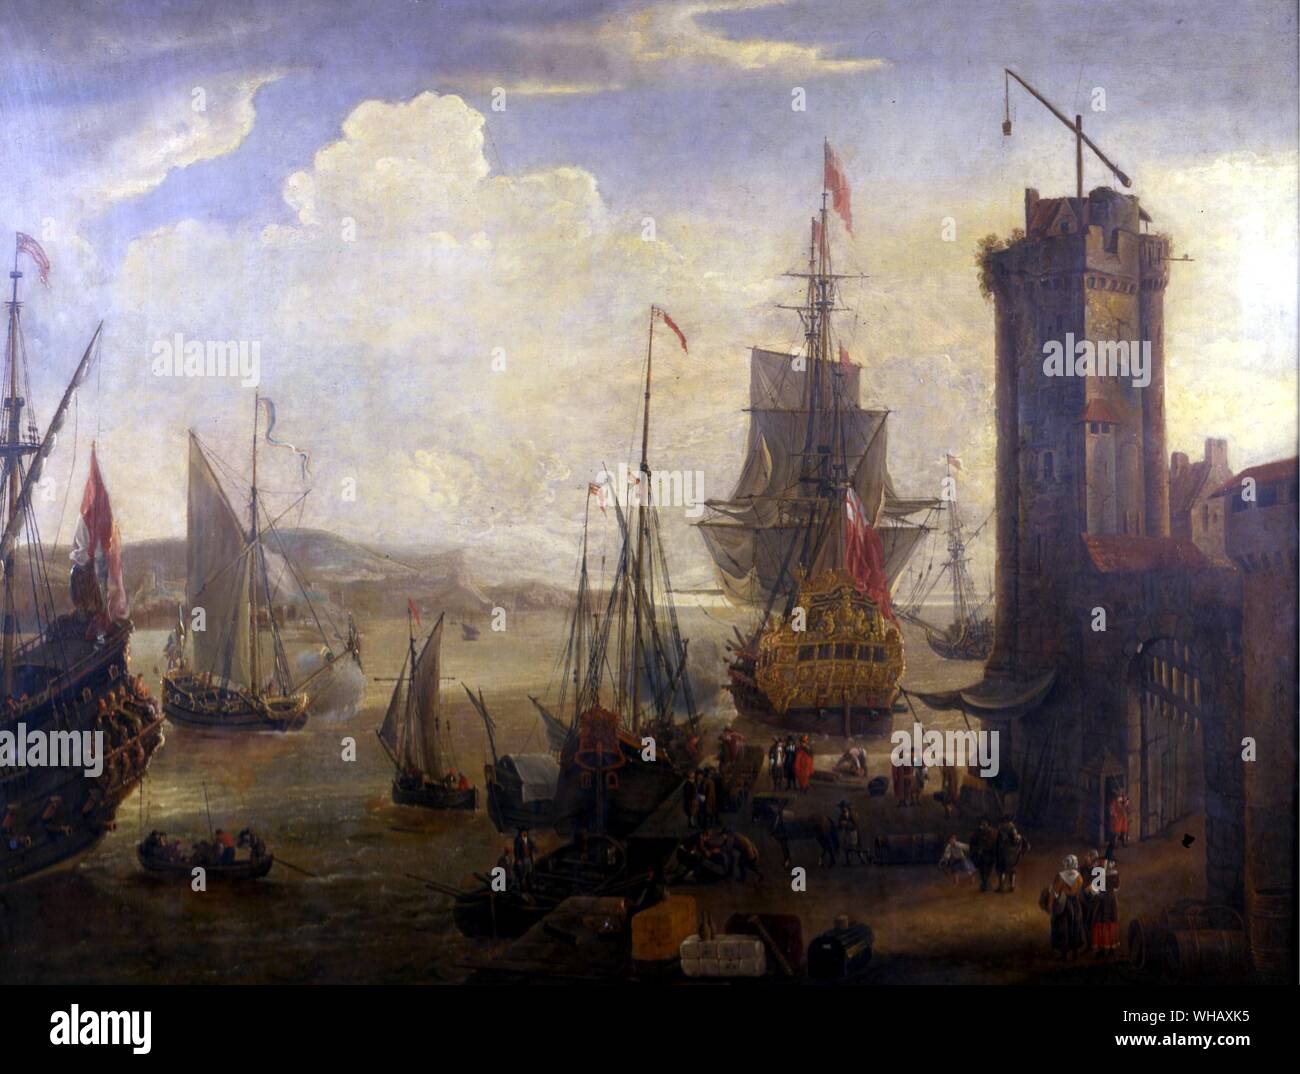 1673 Dock scene at a British Port by Jacob Knyff (1638-1681). National Maritime Museum, Greenwich, London.. English and Dutch ships taking on stores or cargo at a port. Although the port is probably imaginary, it is a sophisticated painting with accurate ships depicted.. . . Stock Photo